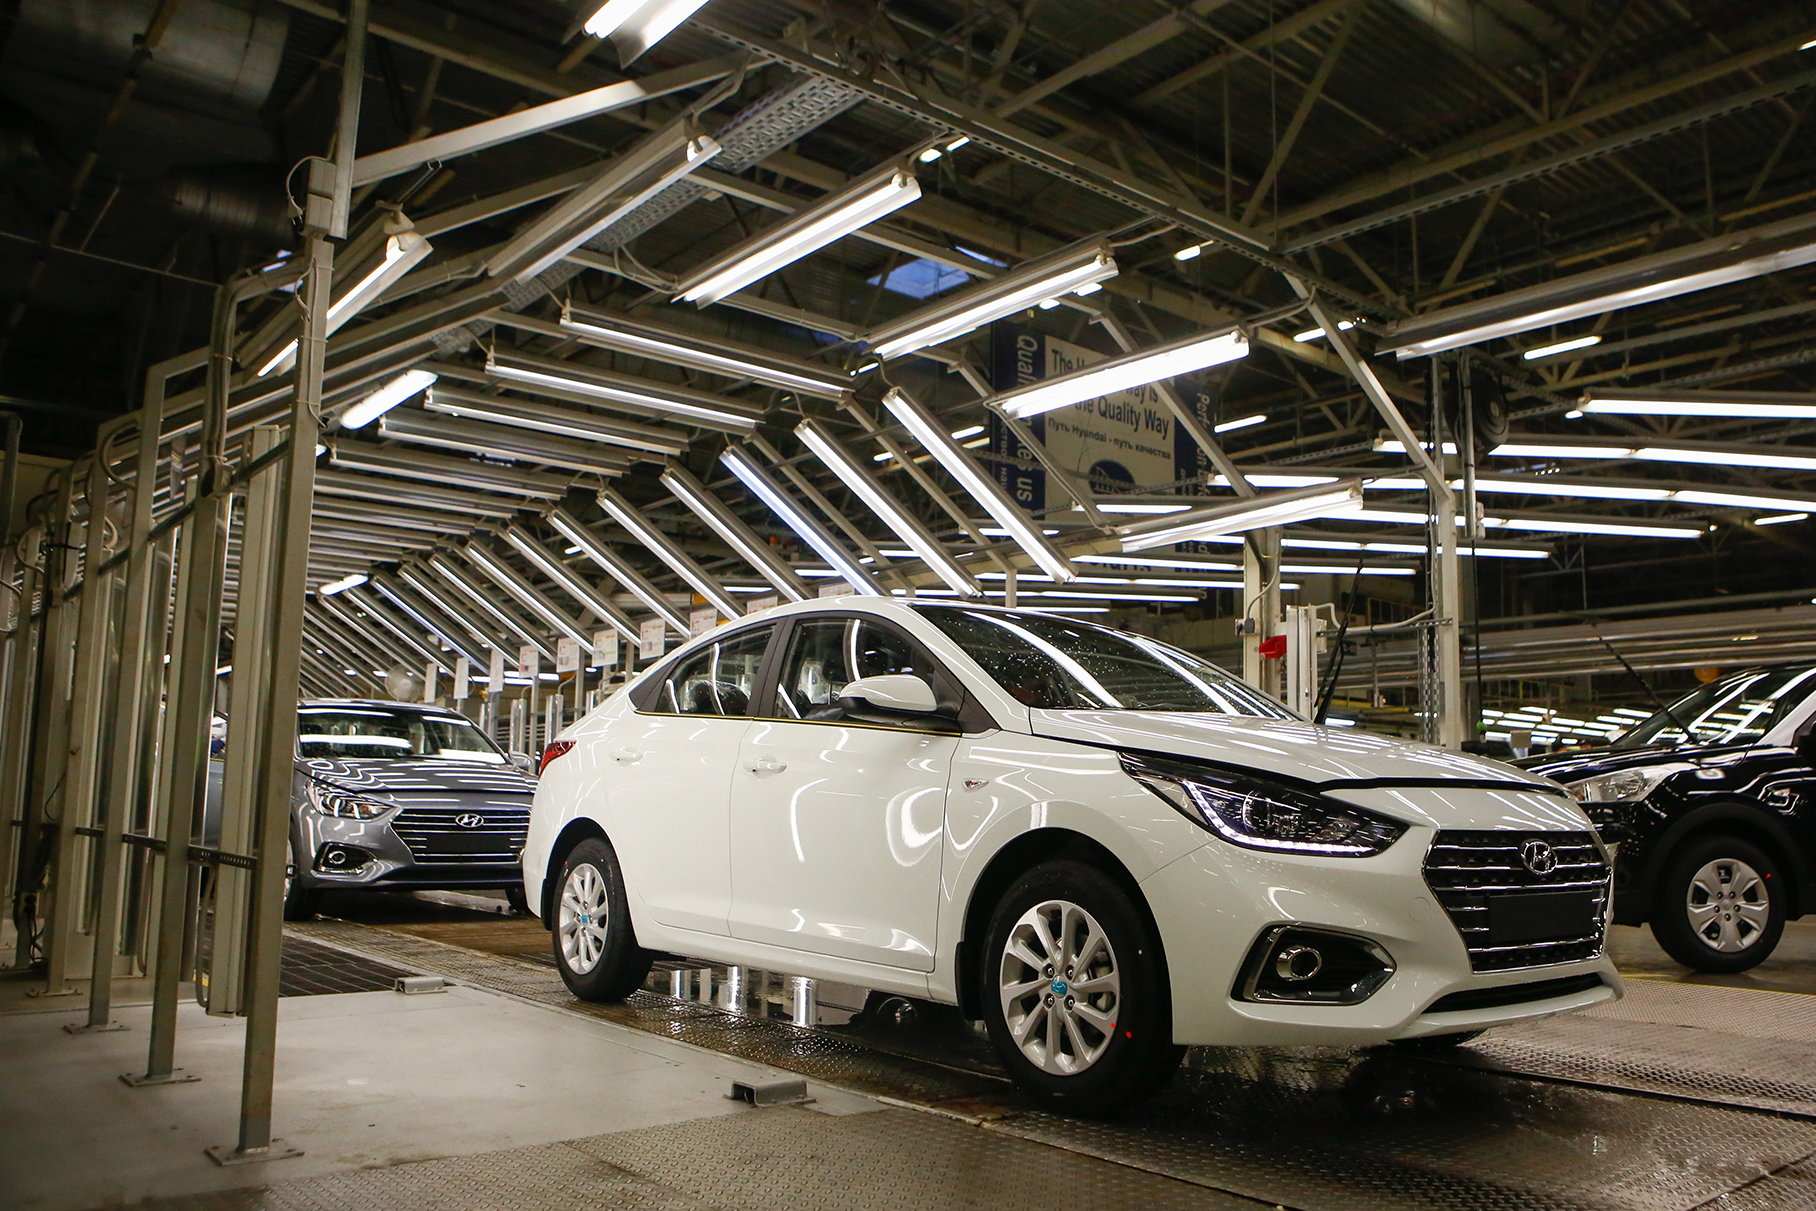 The former Hyundai plant was sued for 150 million rubles